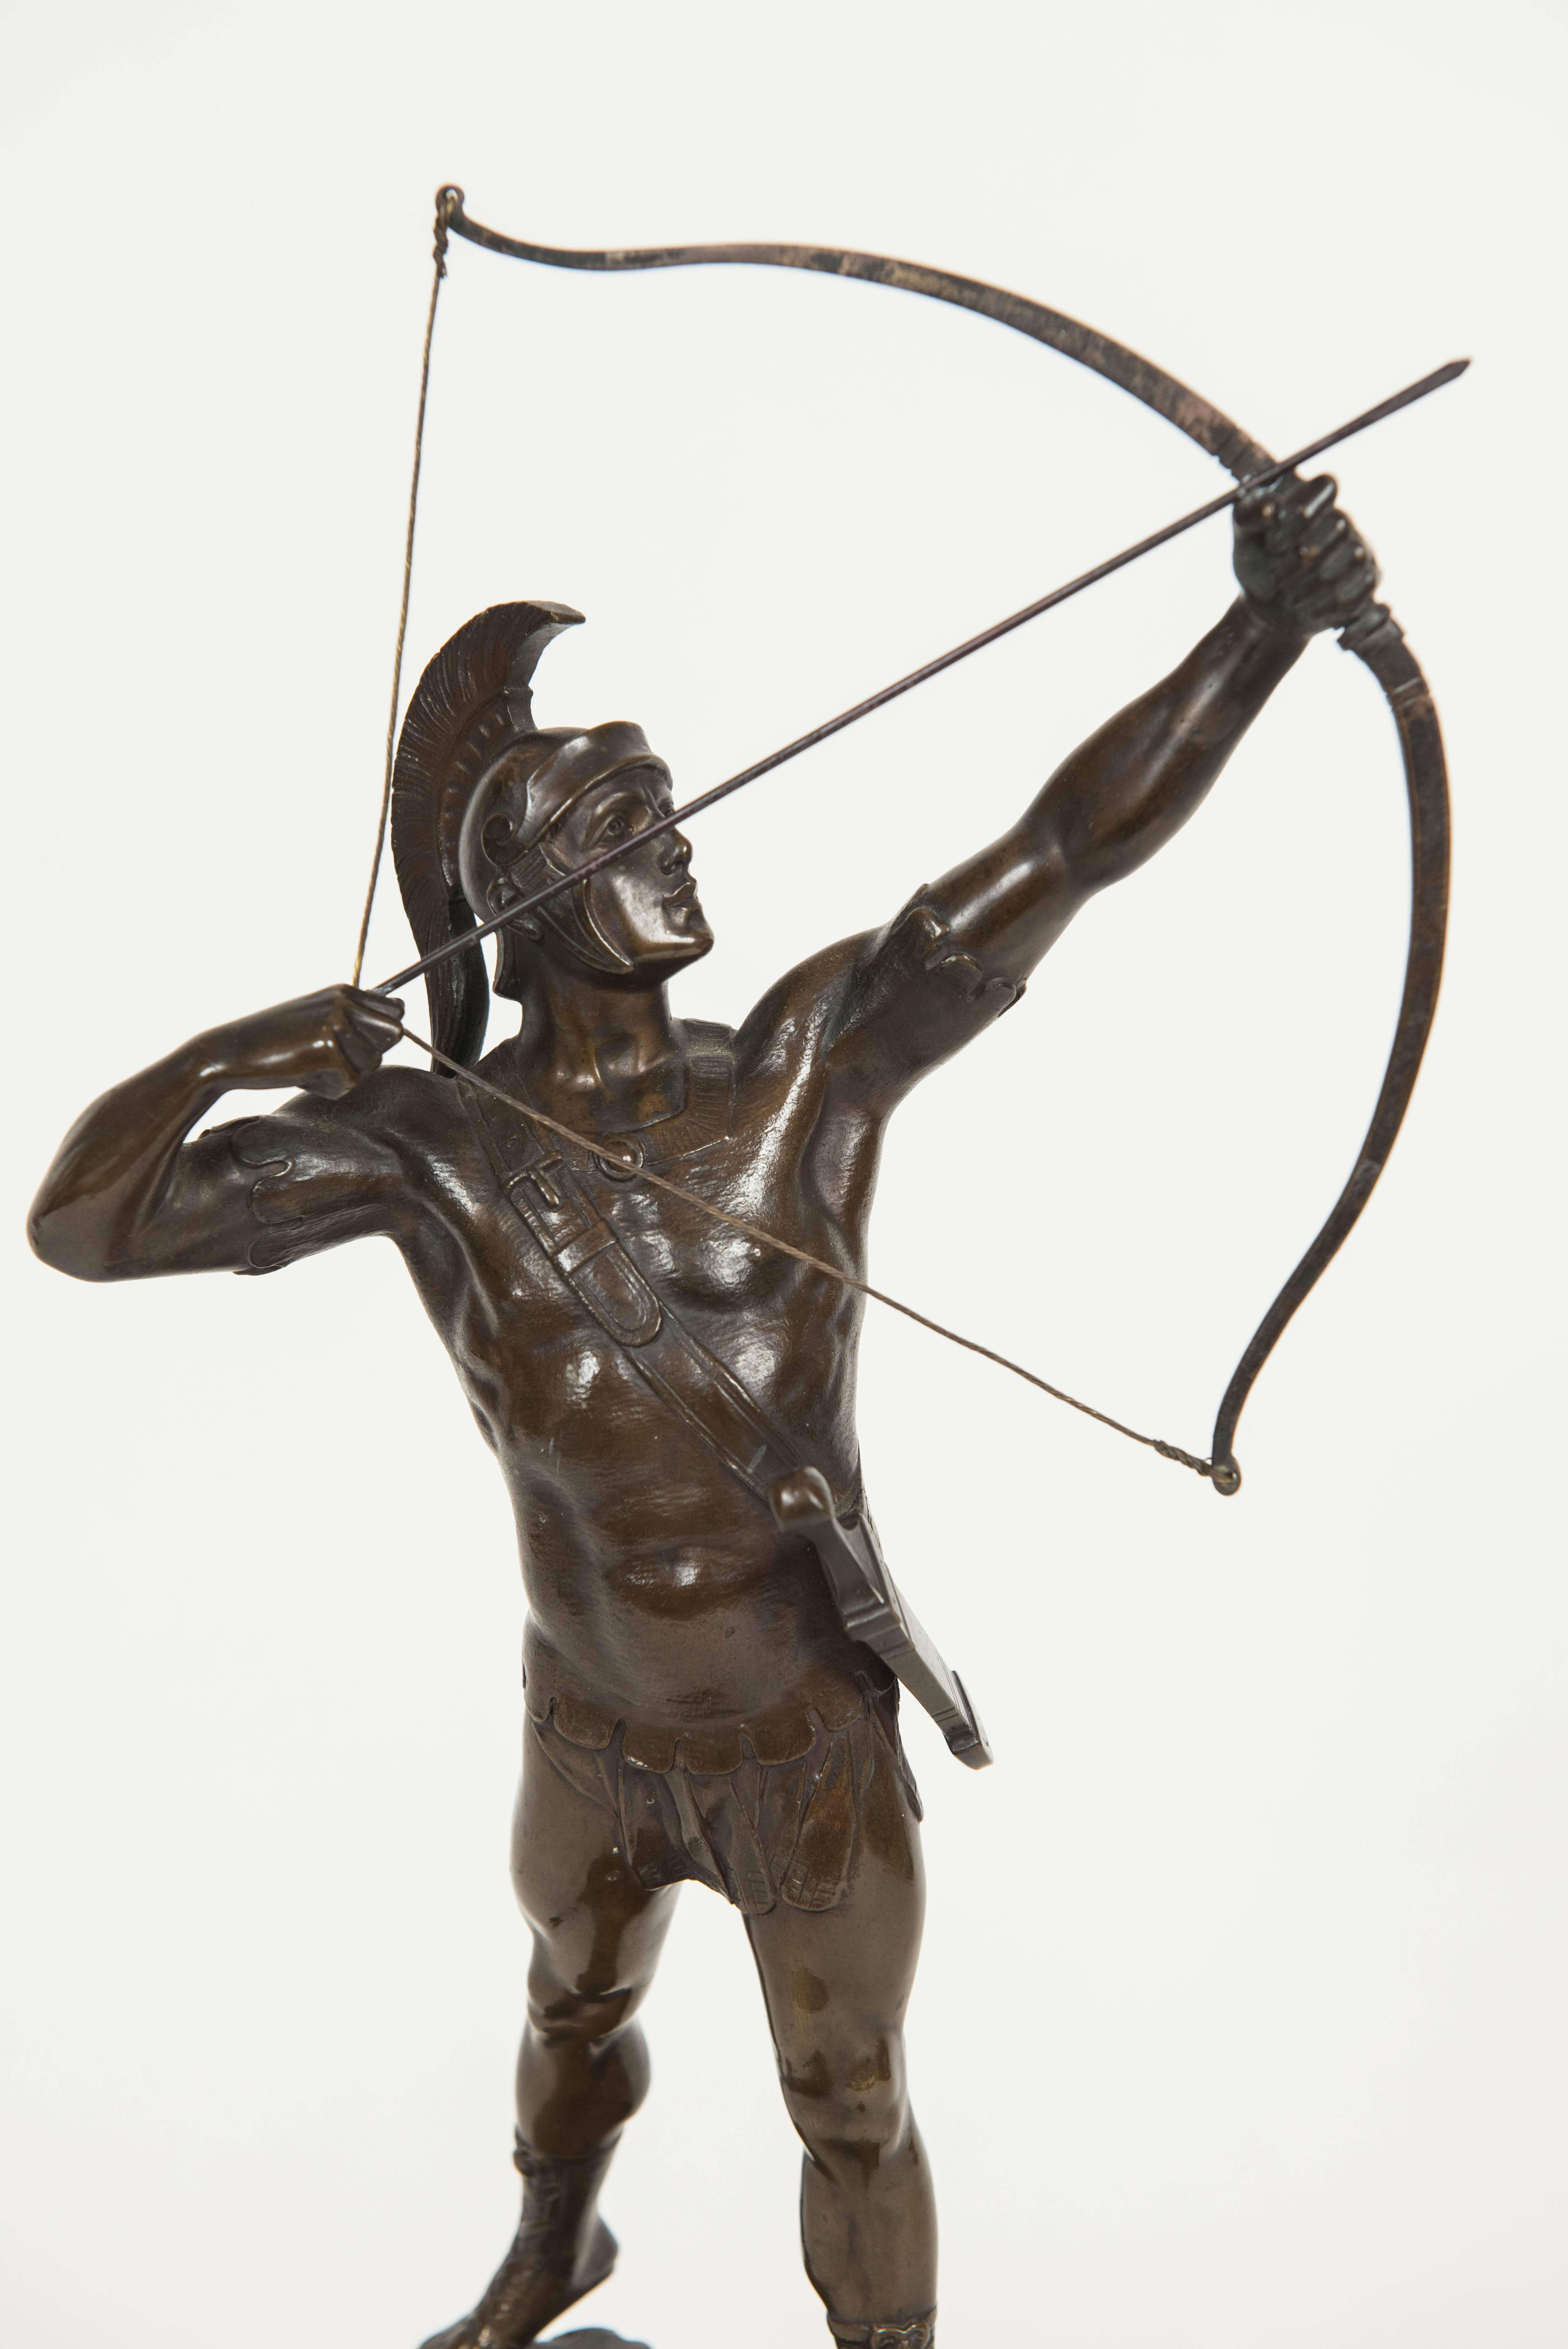 This striking and detailed figure of a Roman Archer in 